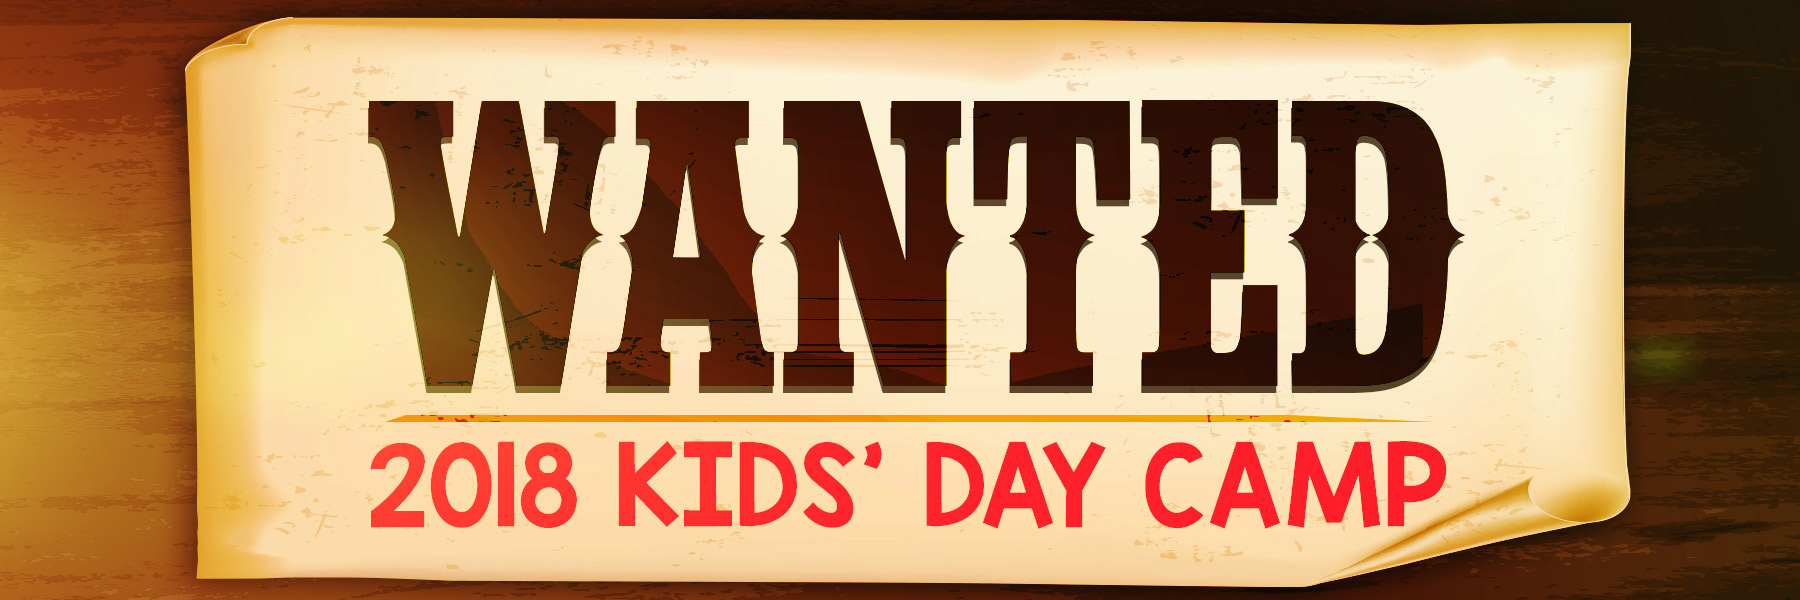 Wanted Kids Camp Finale